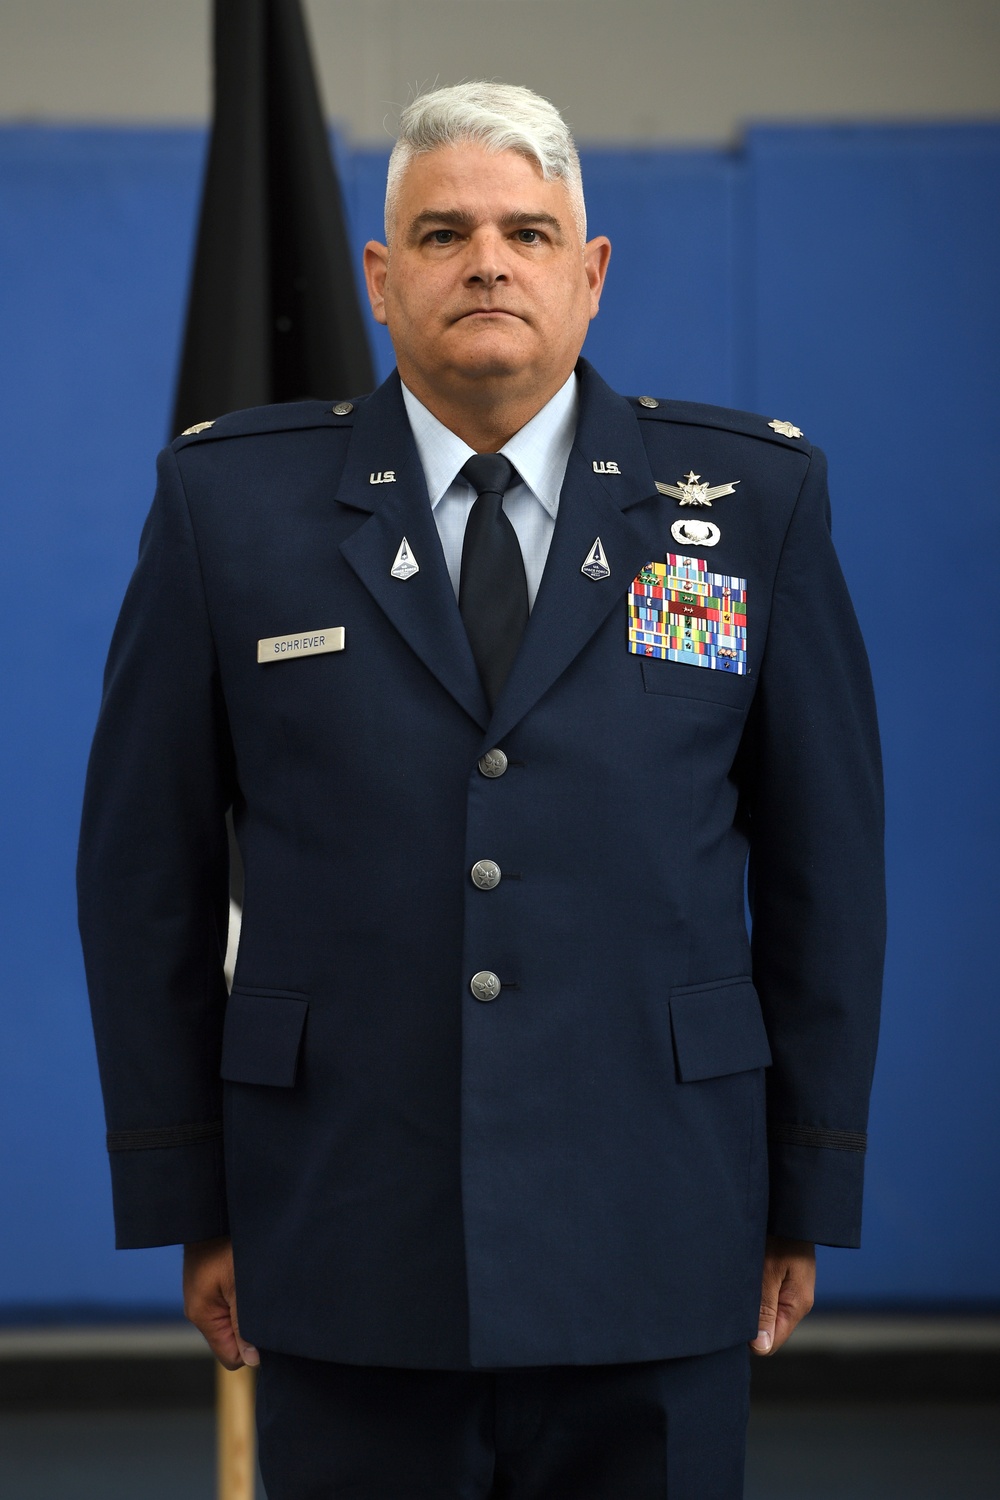 2nd Space Operations Squadron Change of Command